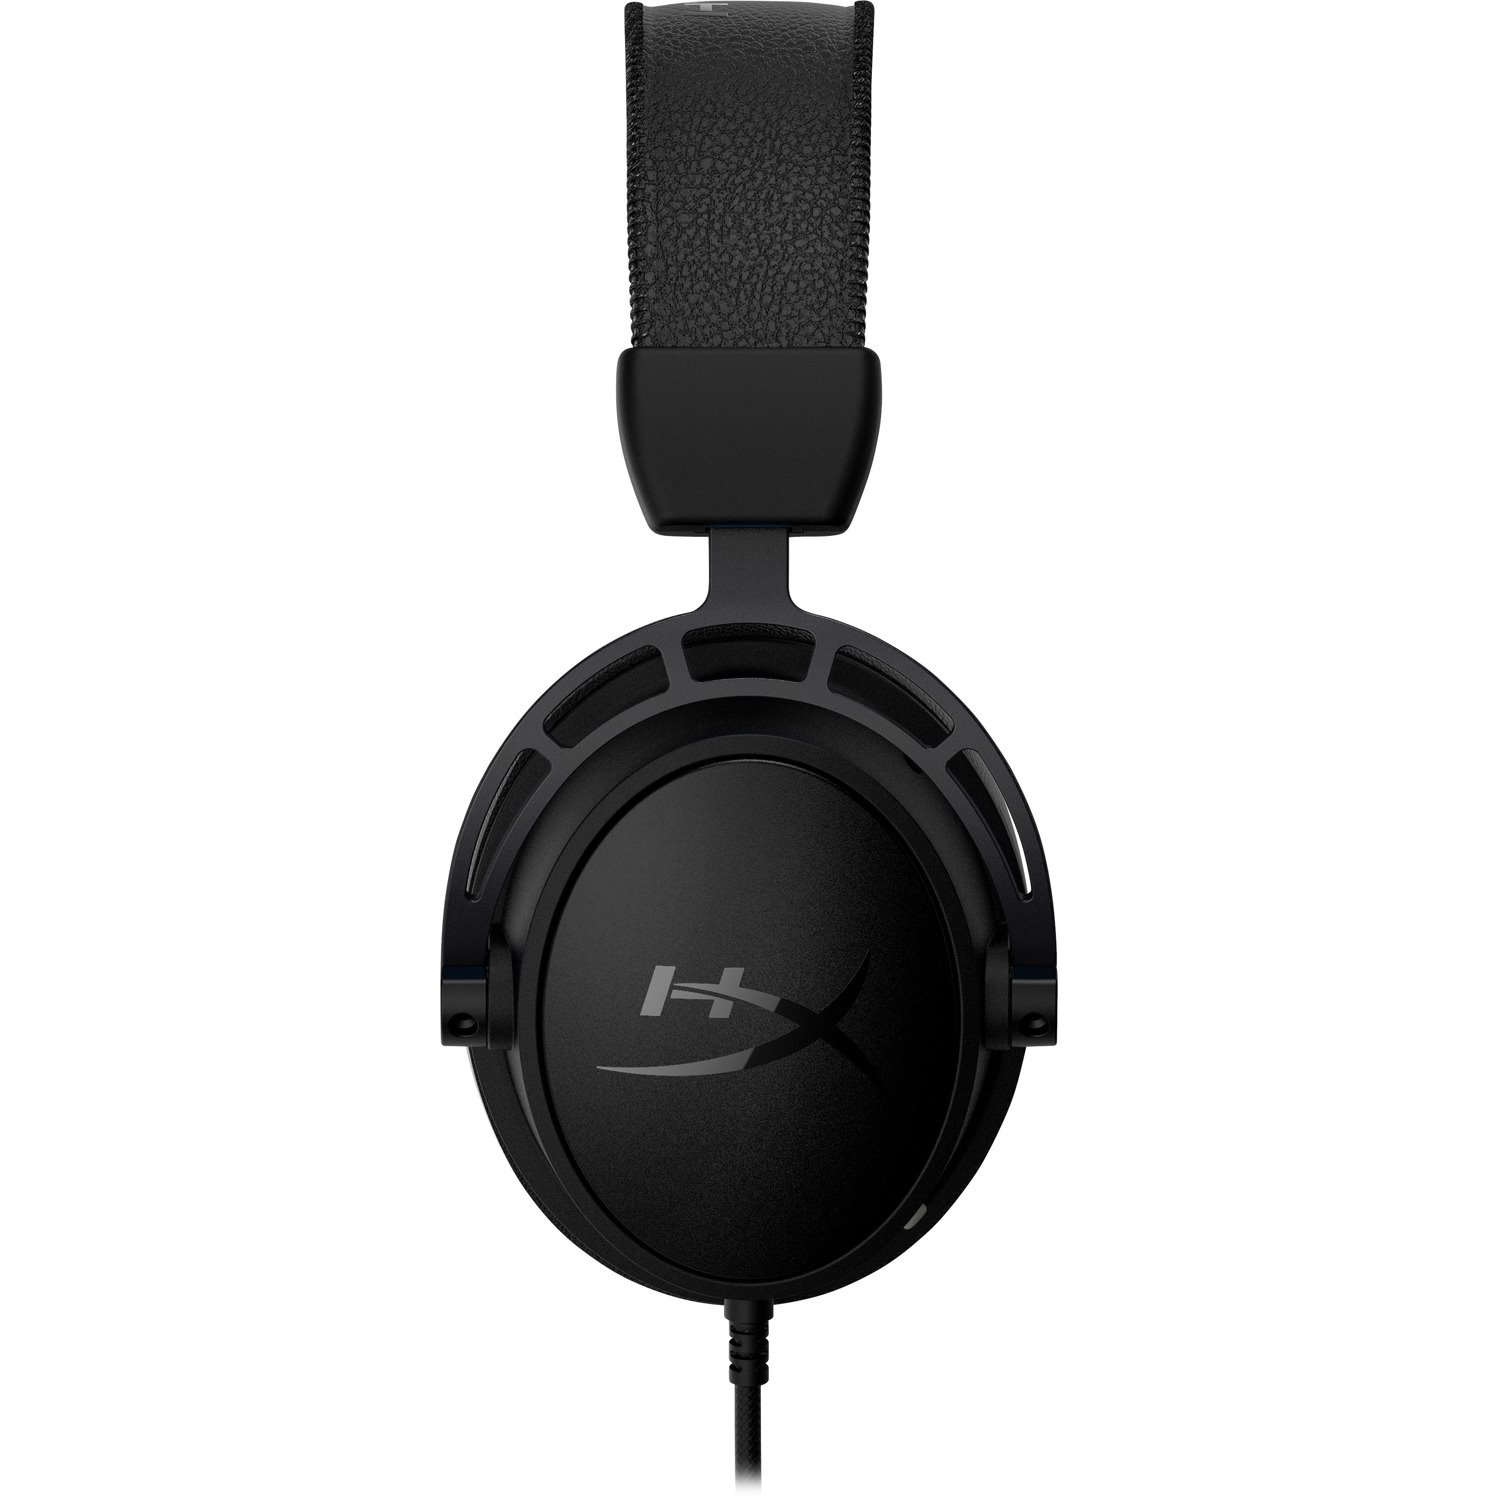 HyperX Cloud Alpha S Wired Over-the-ear, Over-the-head Stereo Gaming Headset - Black